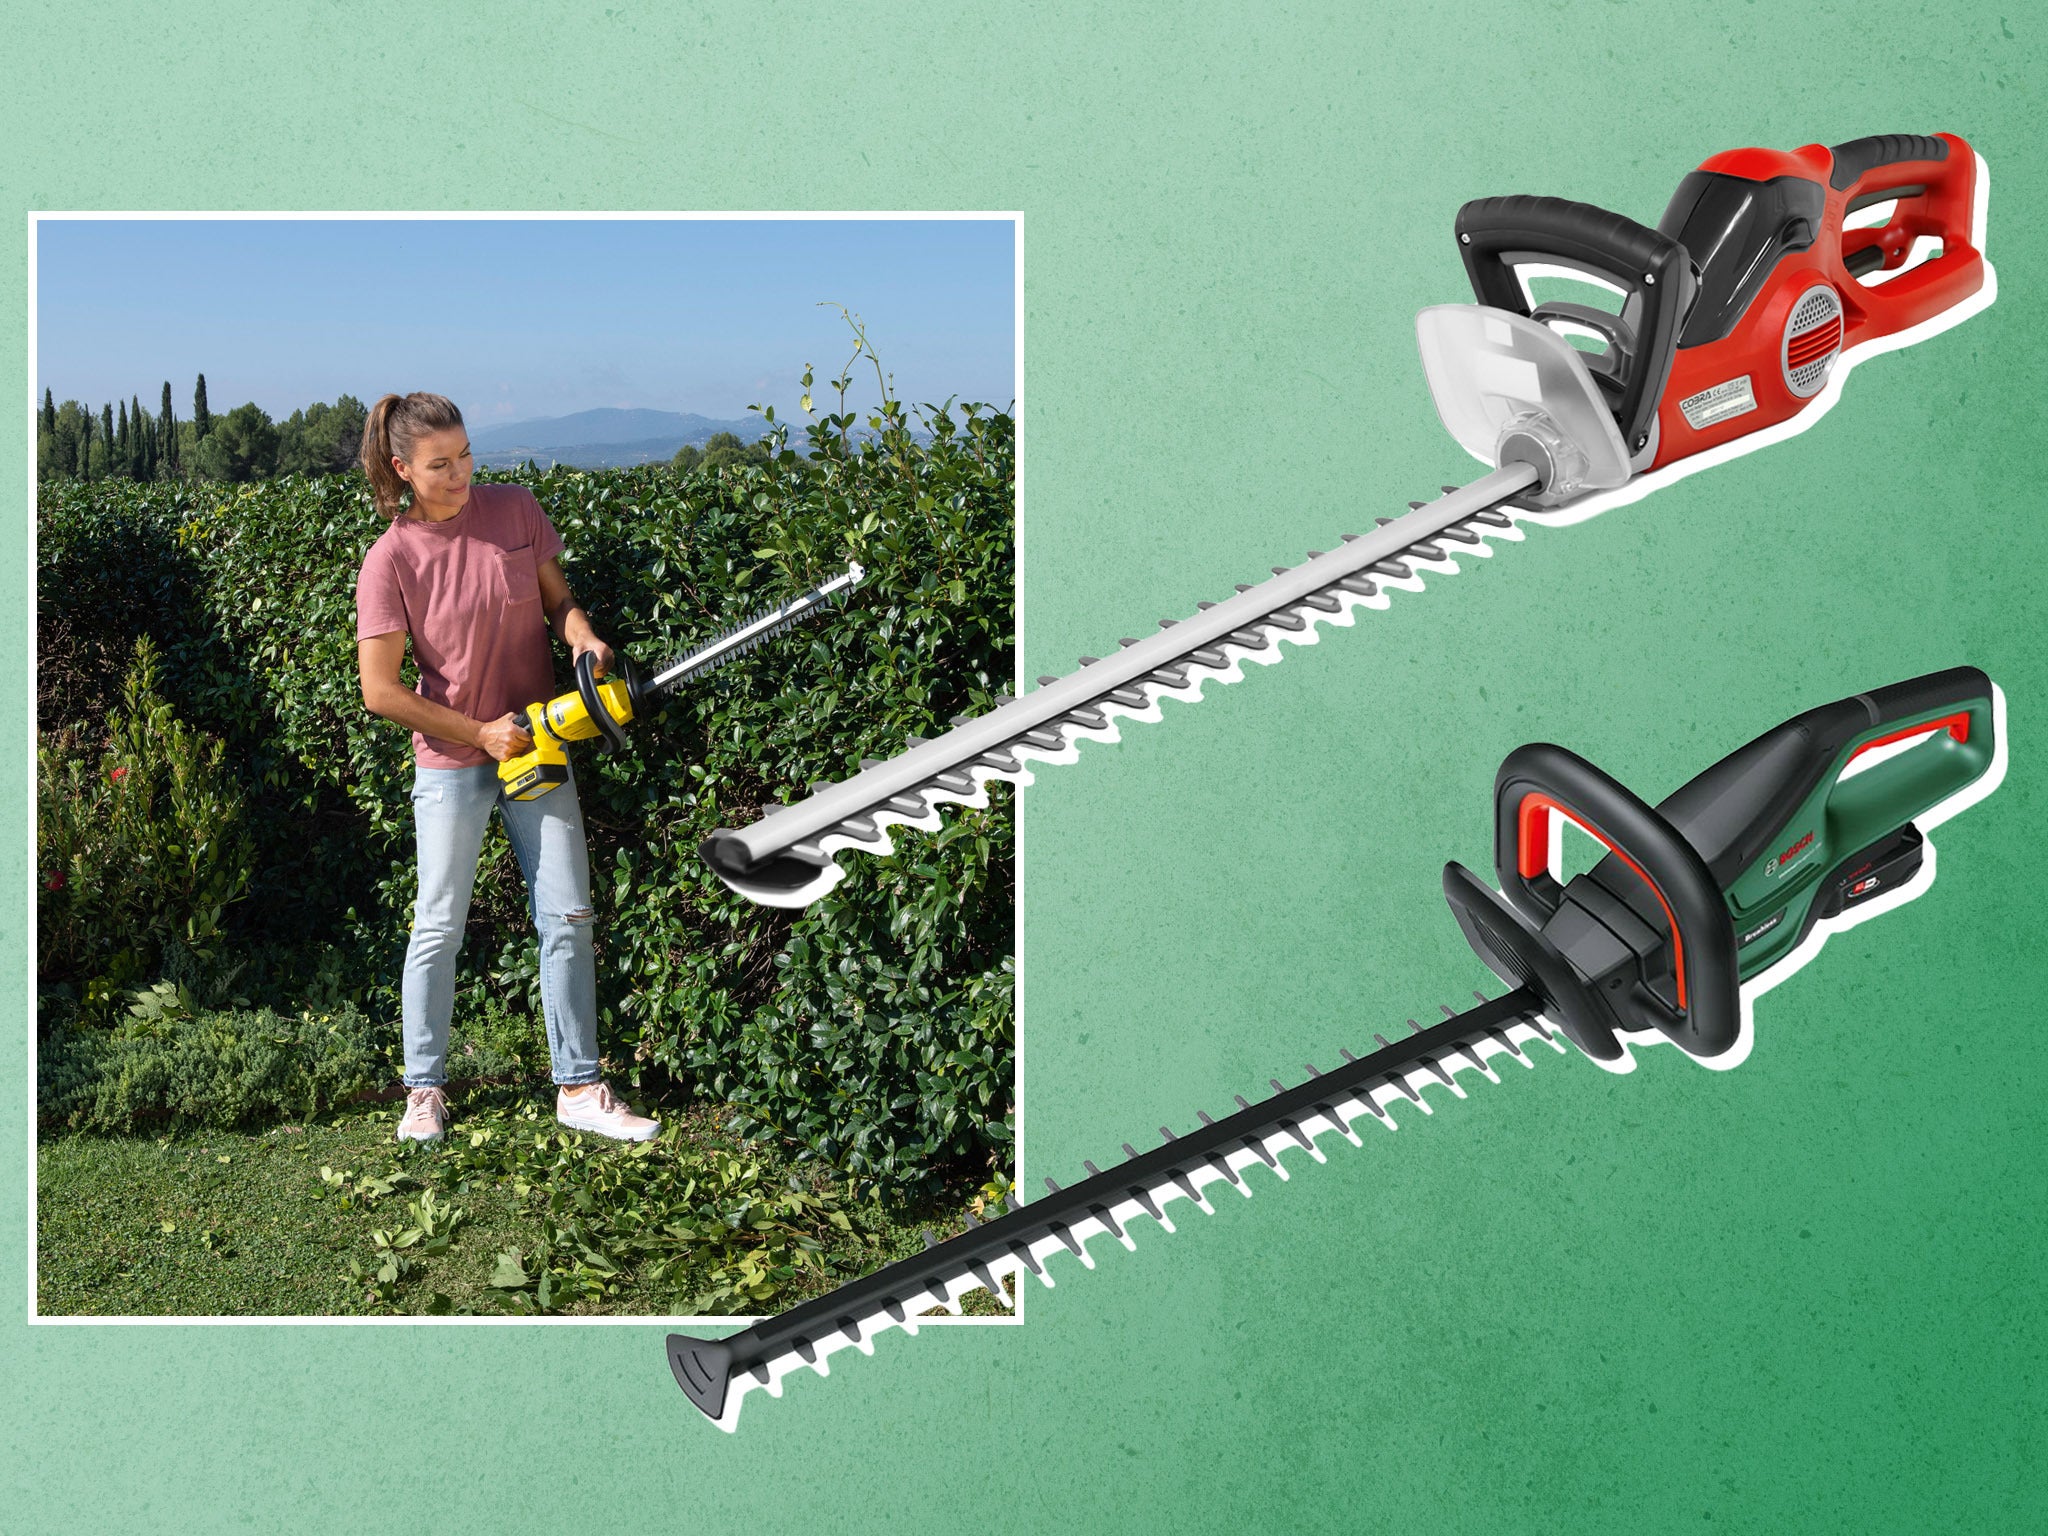 Top trimmers can breeze through varying branch thicknesses without jamming or snagging